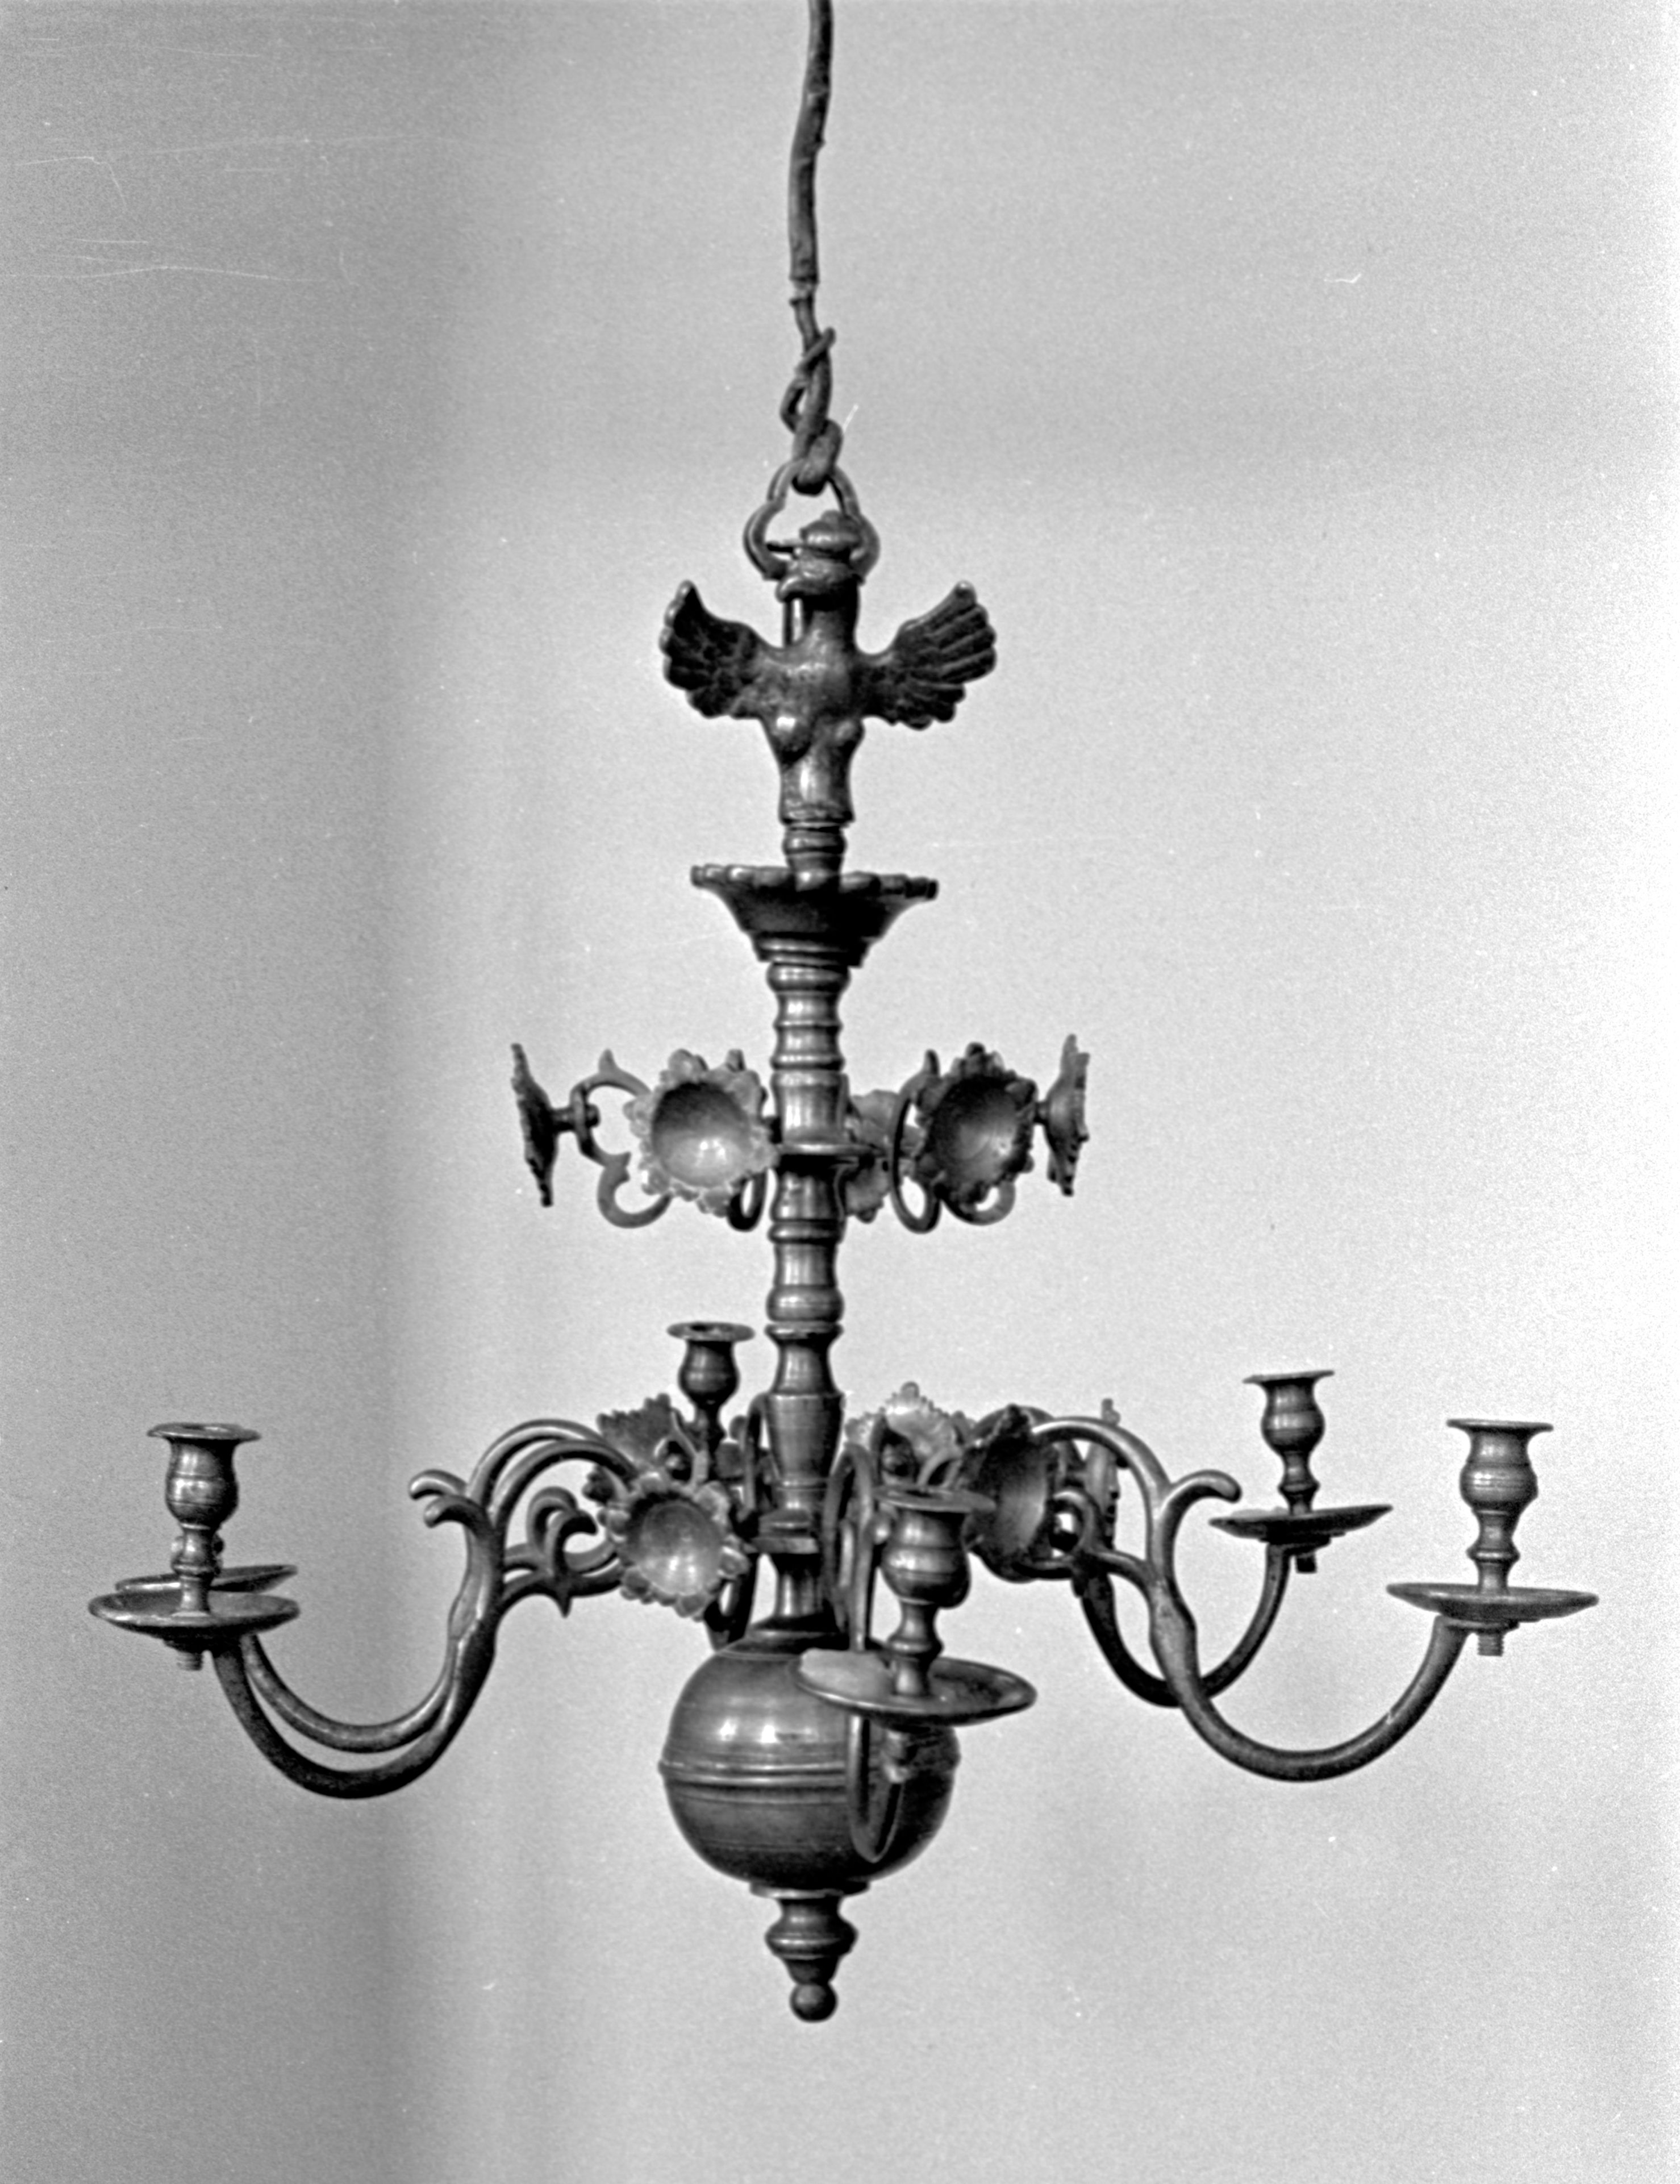 Chandelier, the National M. K. Čiurlionis Museum of Art, Tt-9556. Photo by Š. Liaugaudas, 1979, in: Photographic Documents Department of the CSAL, Inv. No. 11178.8.